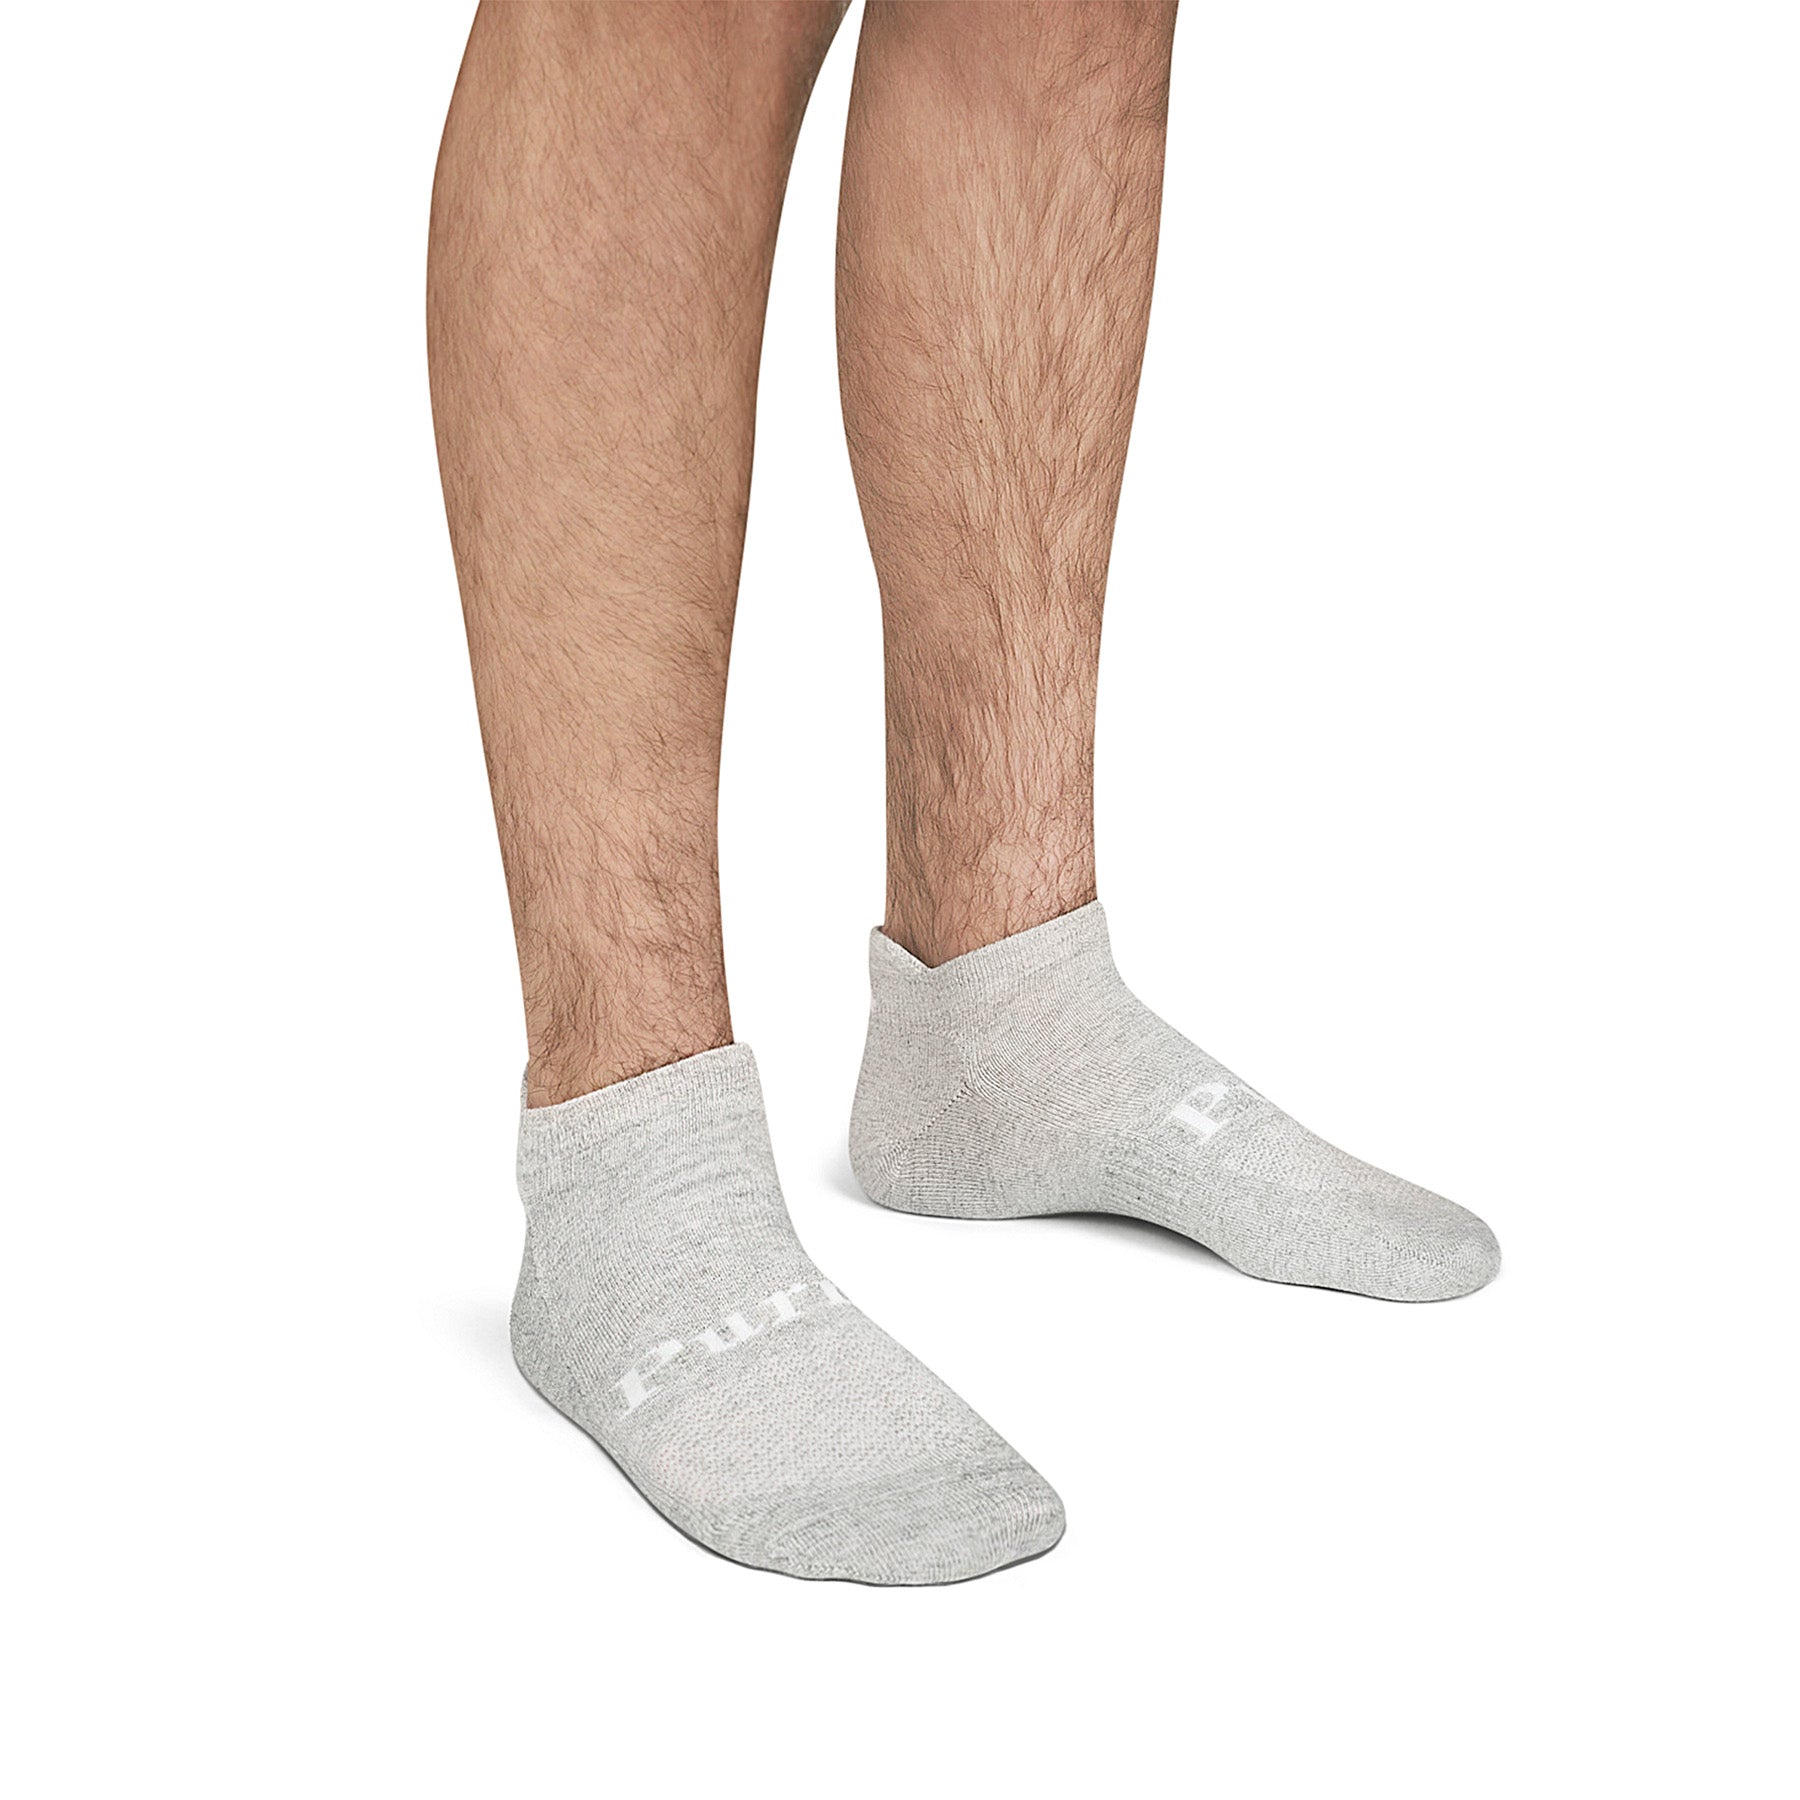 Loose Fit Stays Up! White No Show Socks - 3Pack